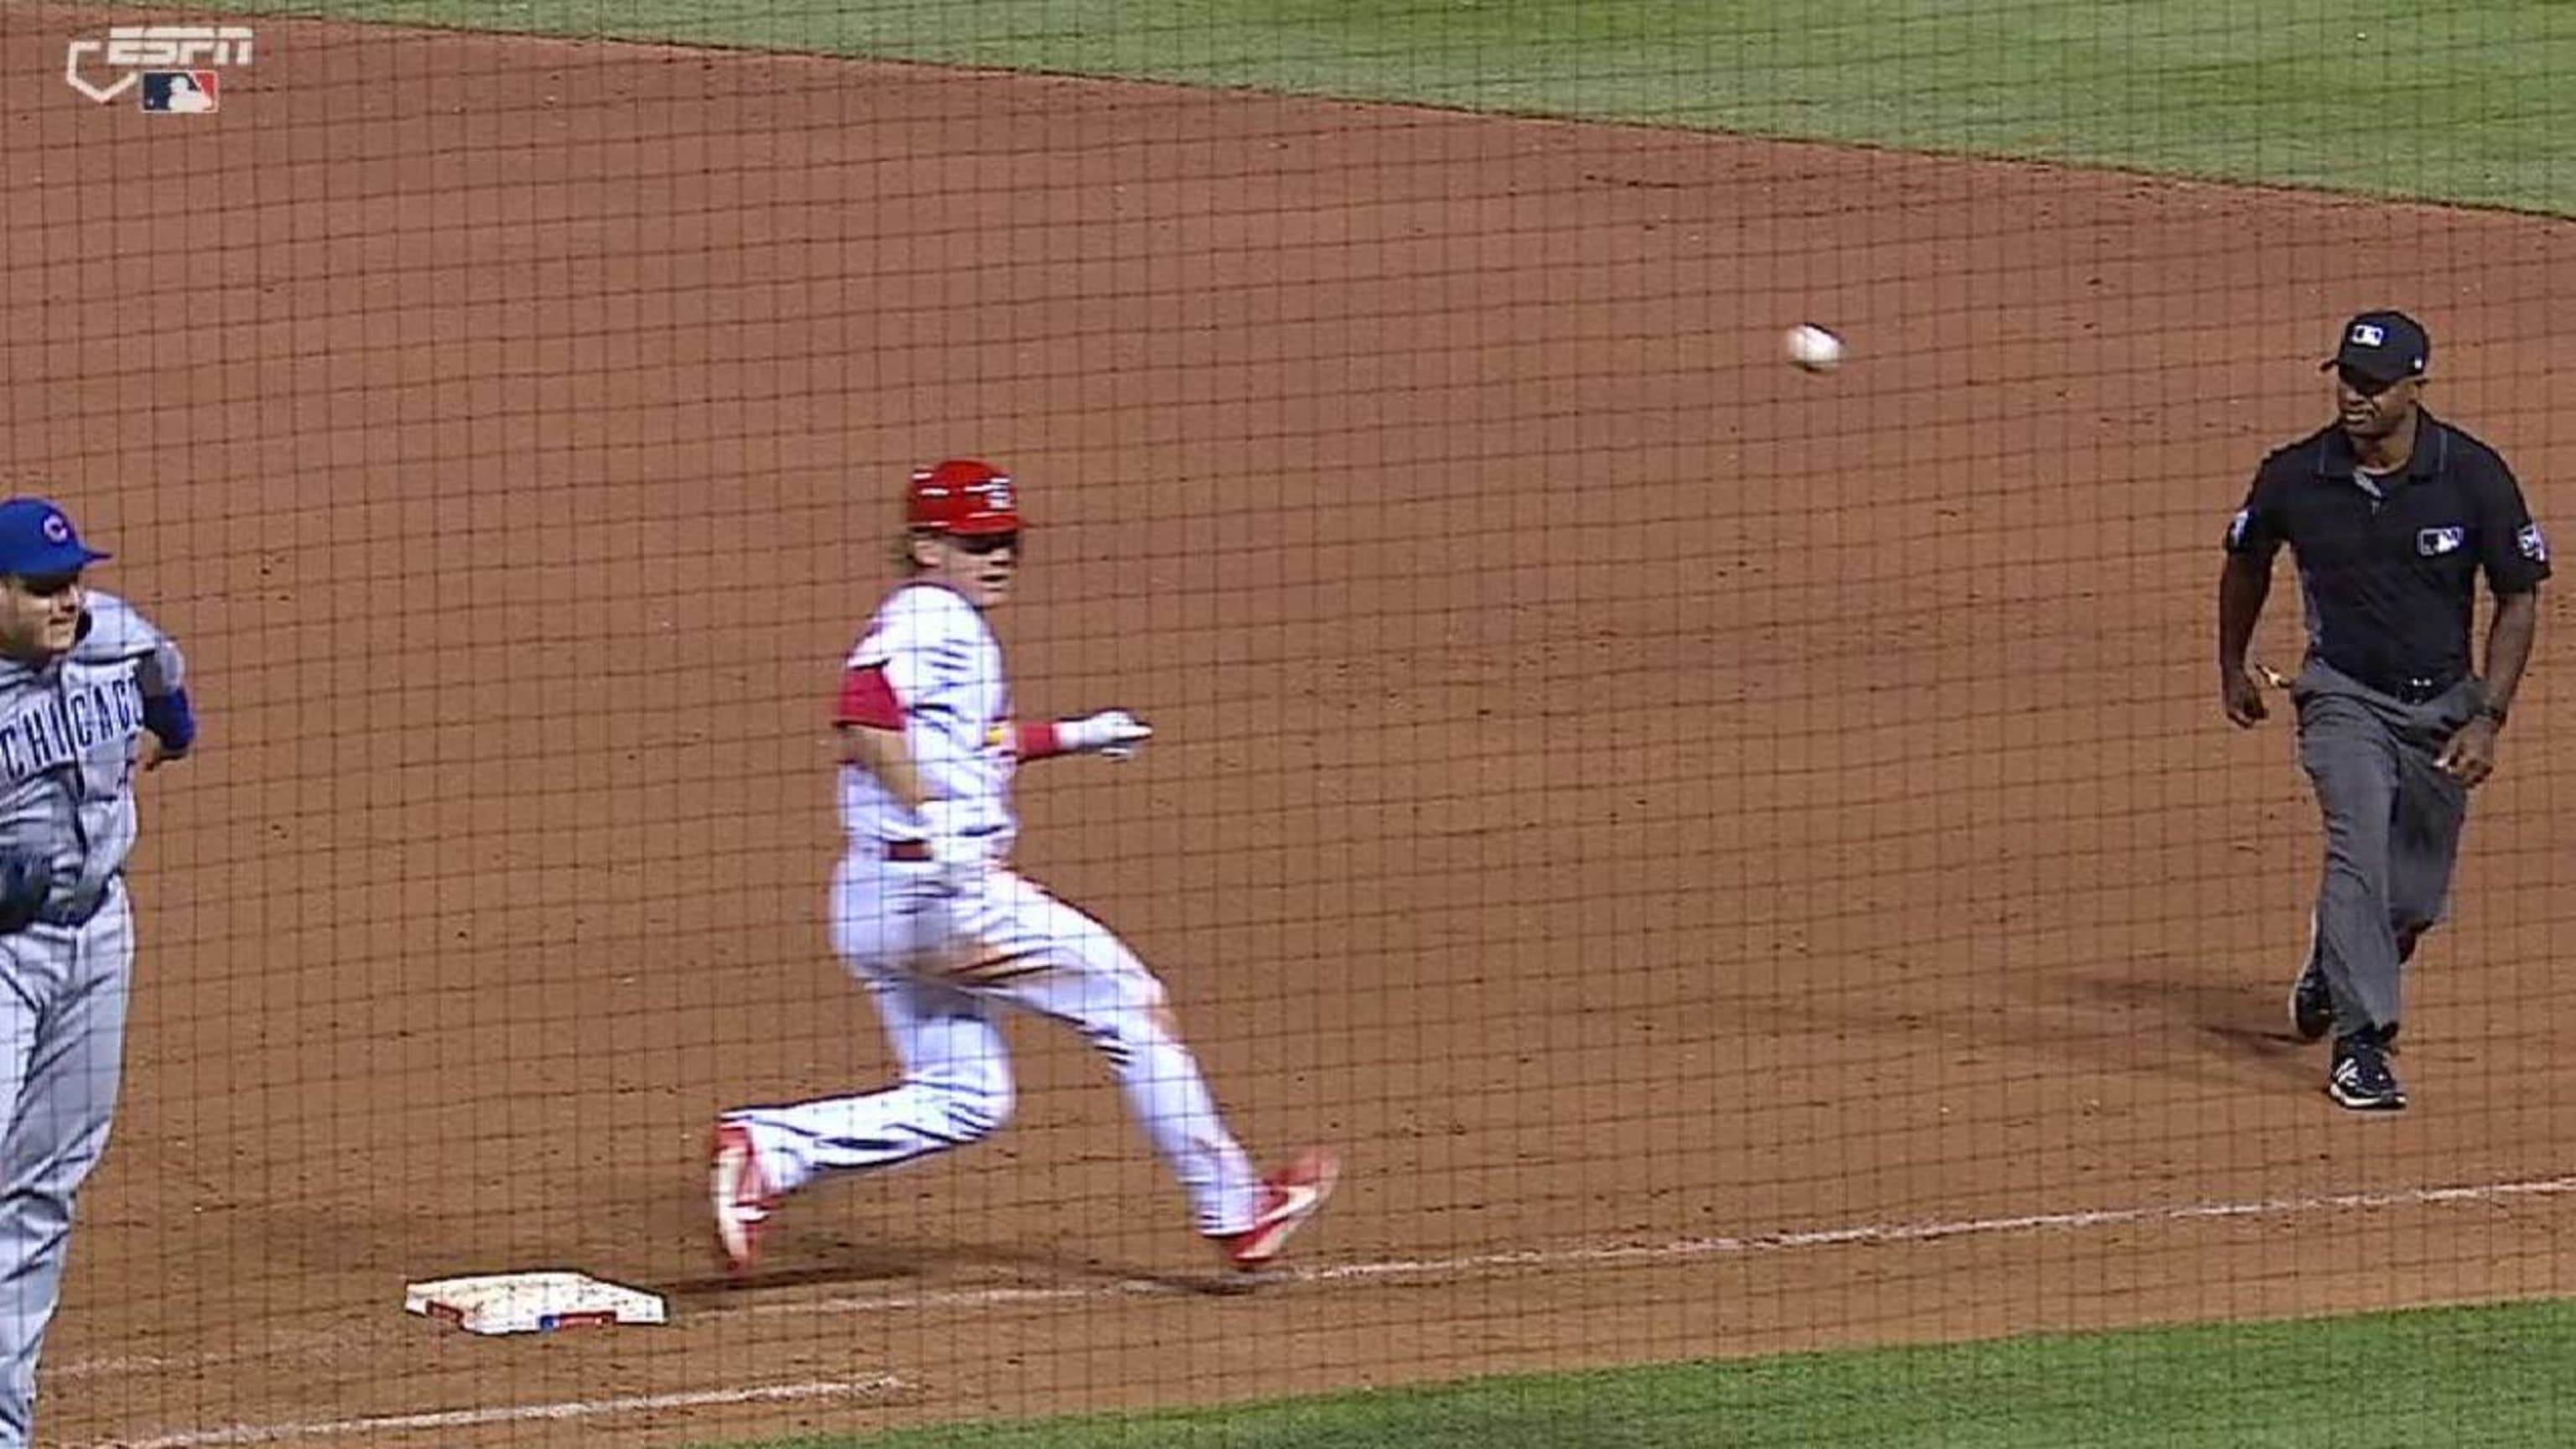 Bader's infield single lifts Cardinals past Giants 2-1